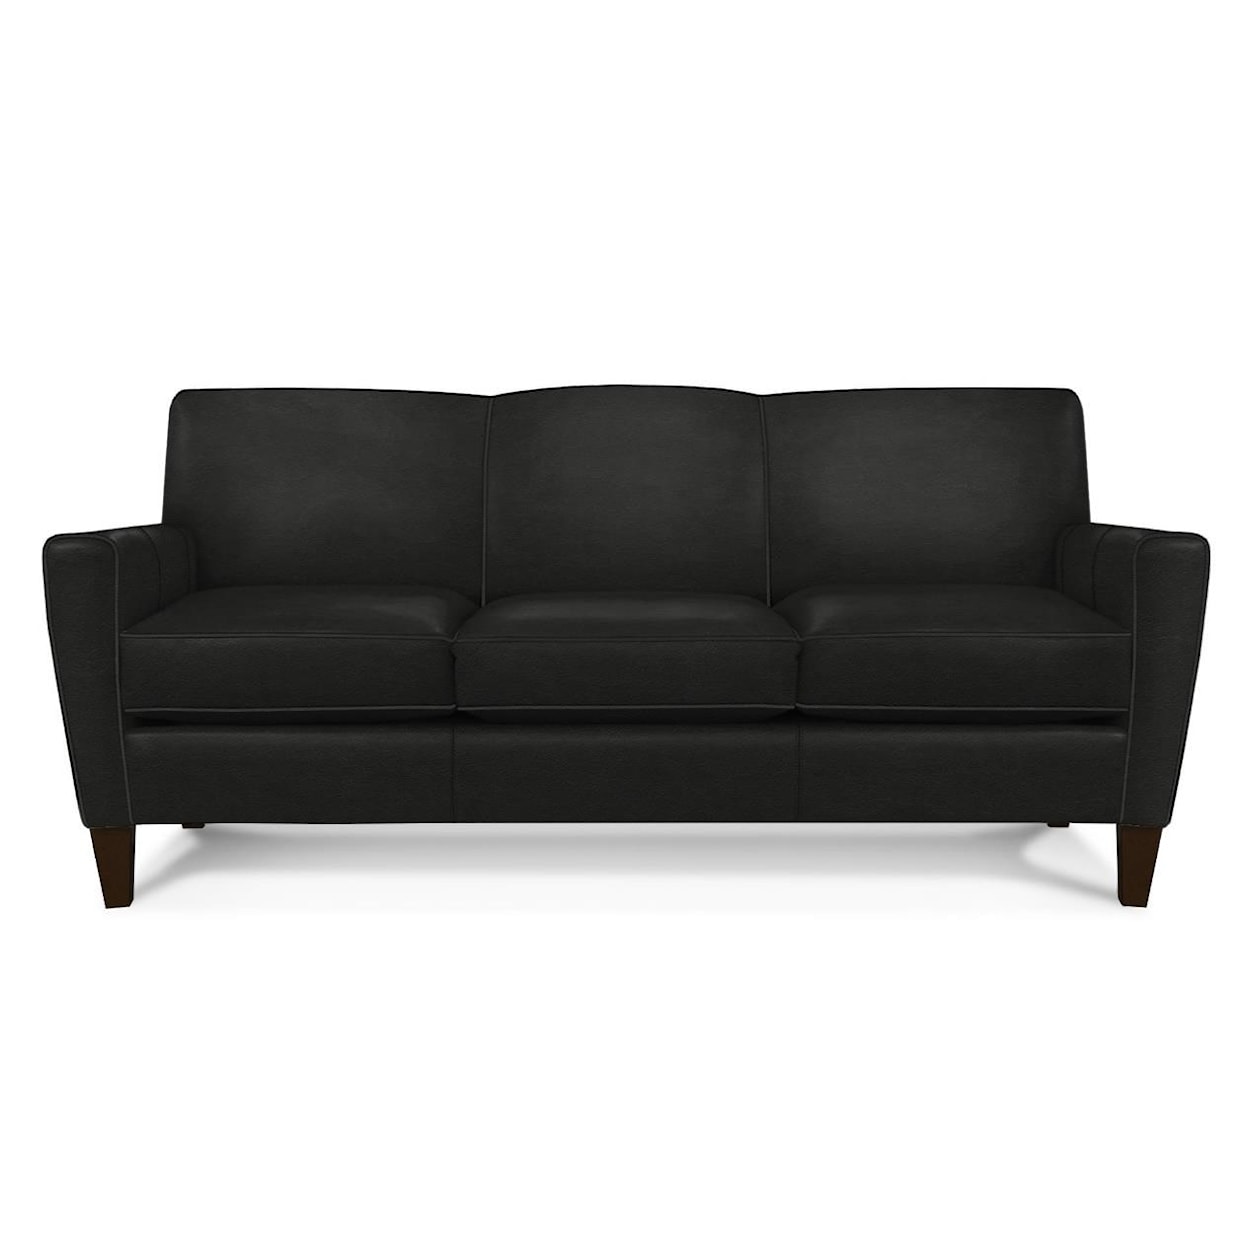 England 6200/LS Series Lynette Contemporary Leather Sofa